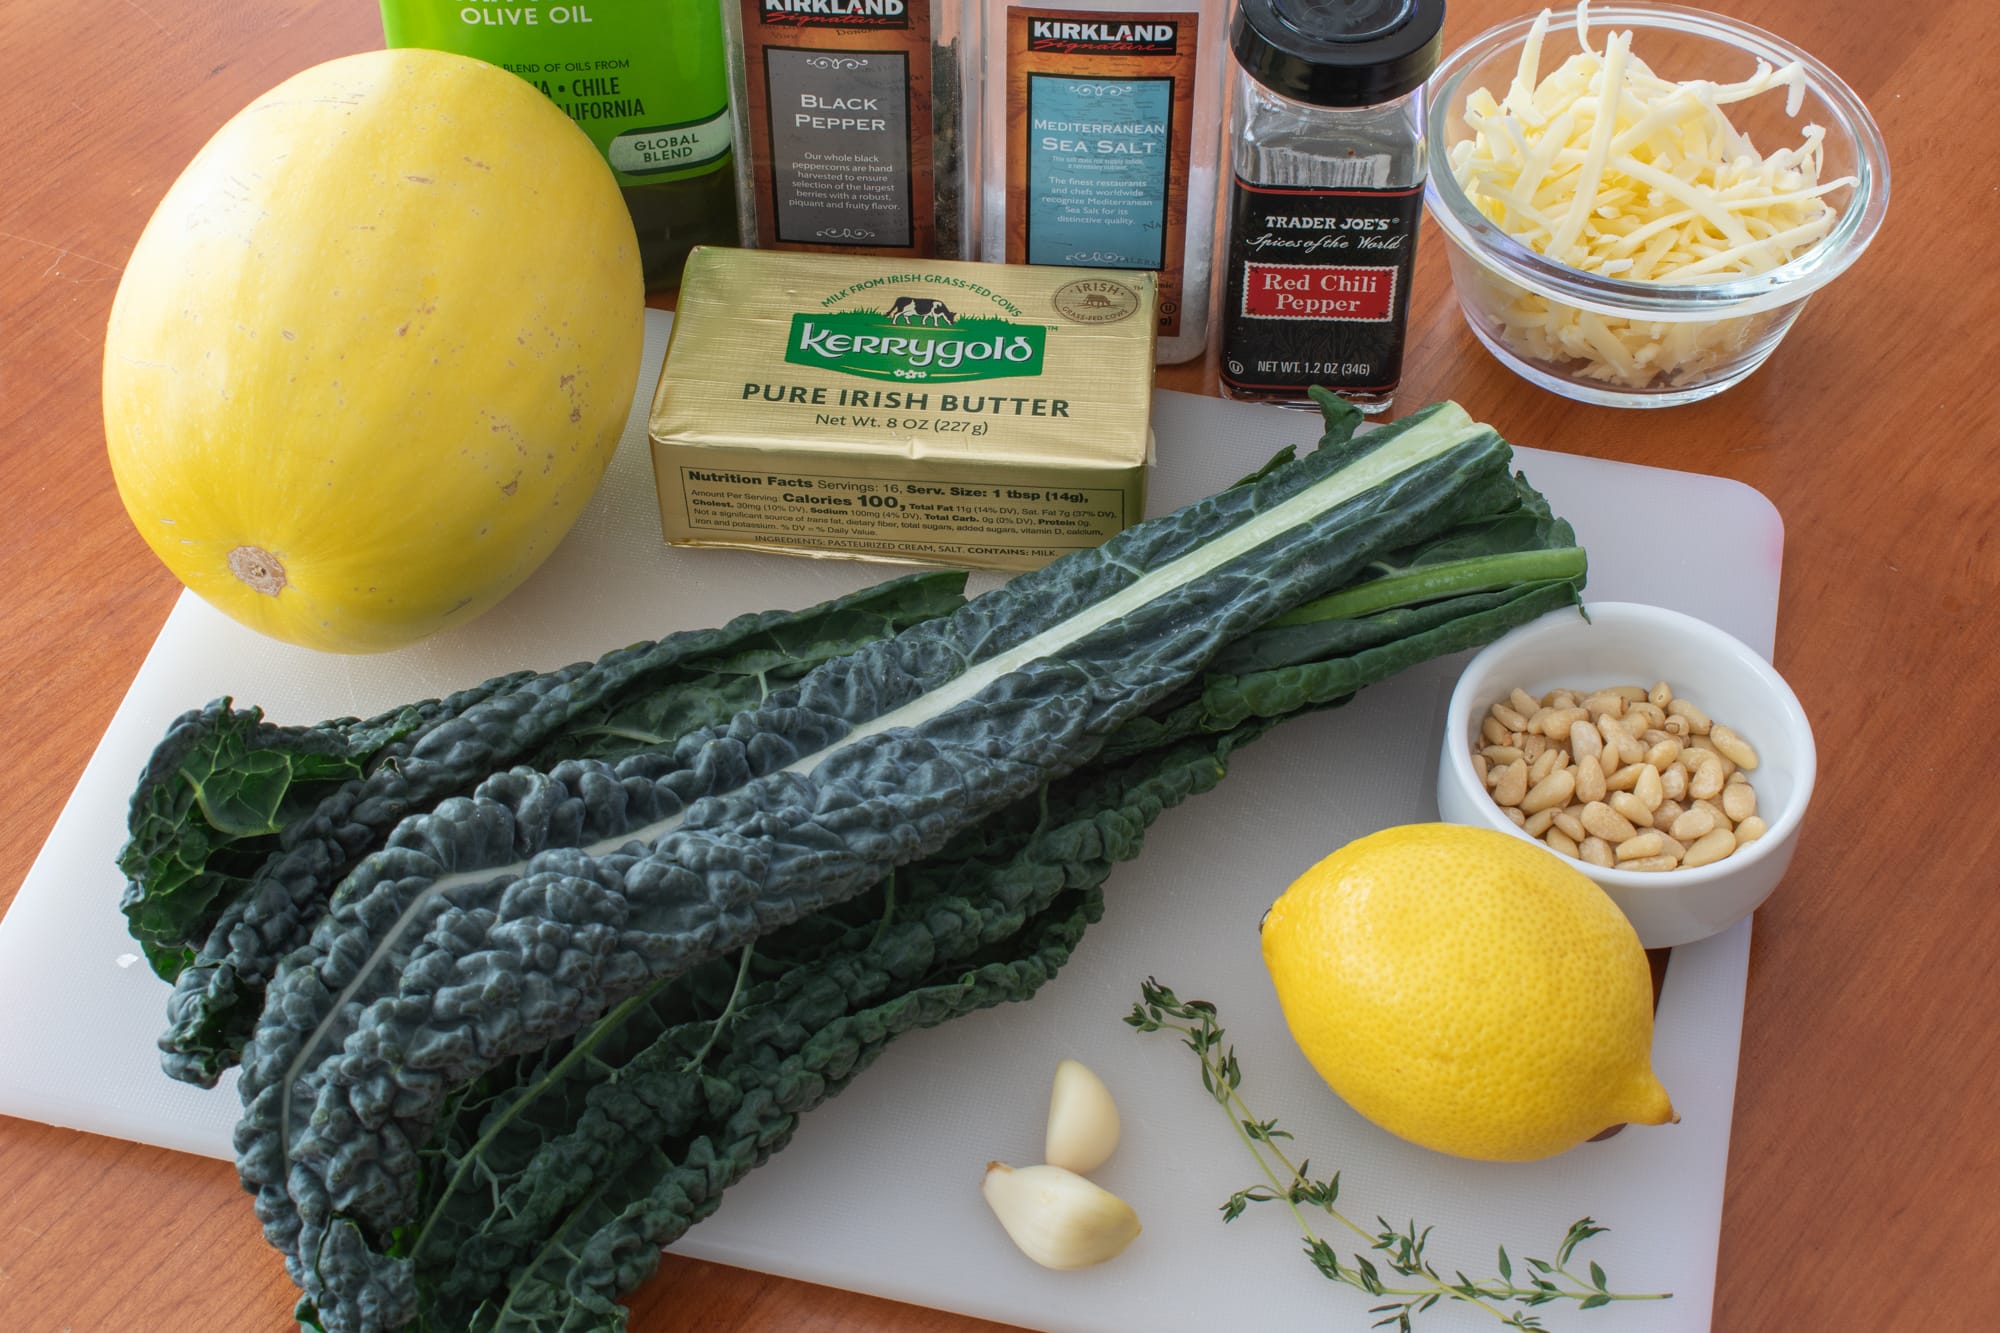 Brown Butter Kale and Fontina Spaghetti Squash